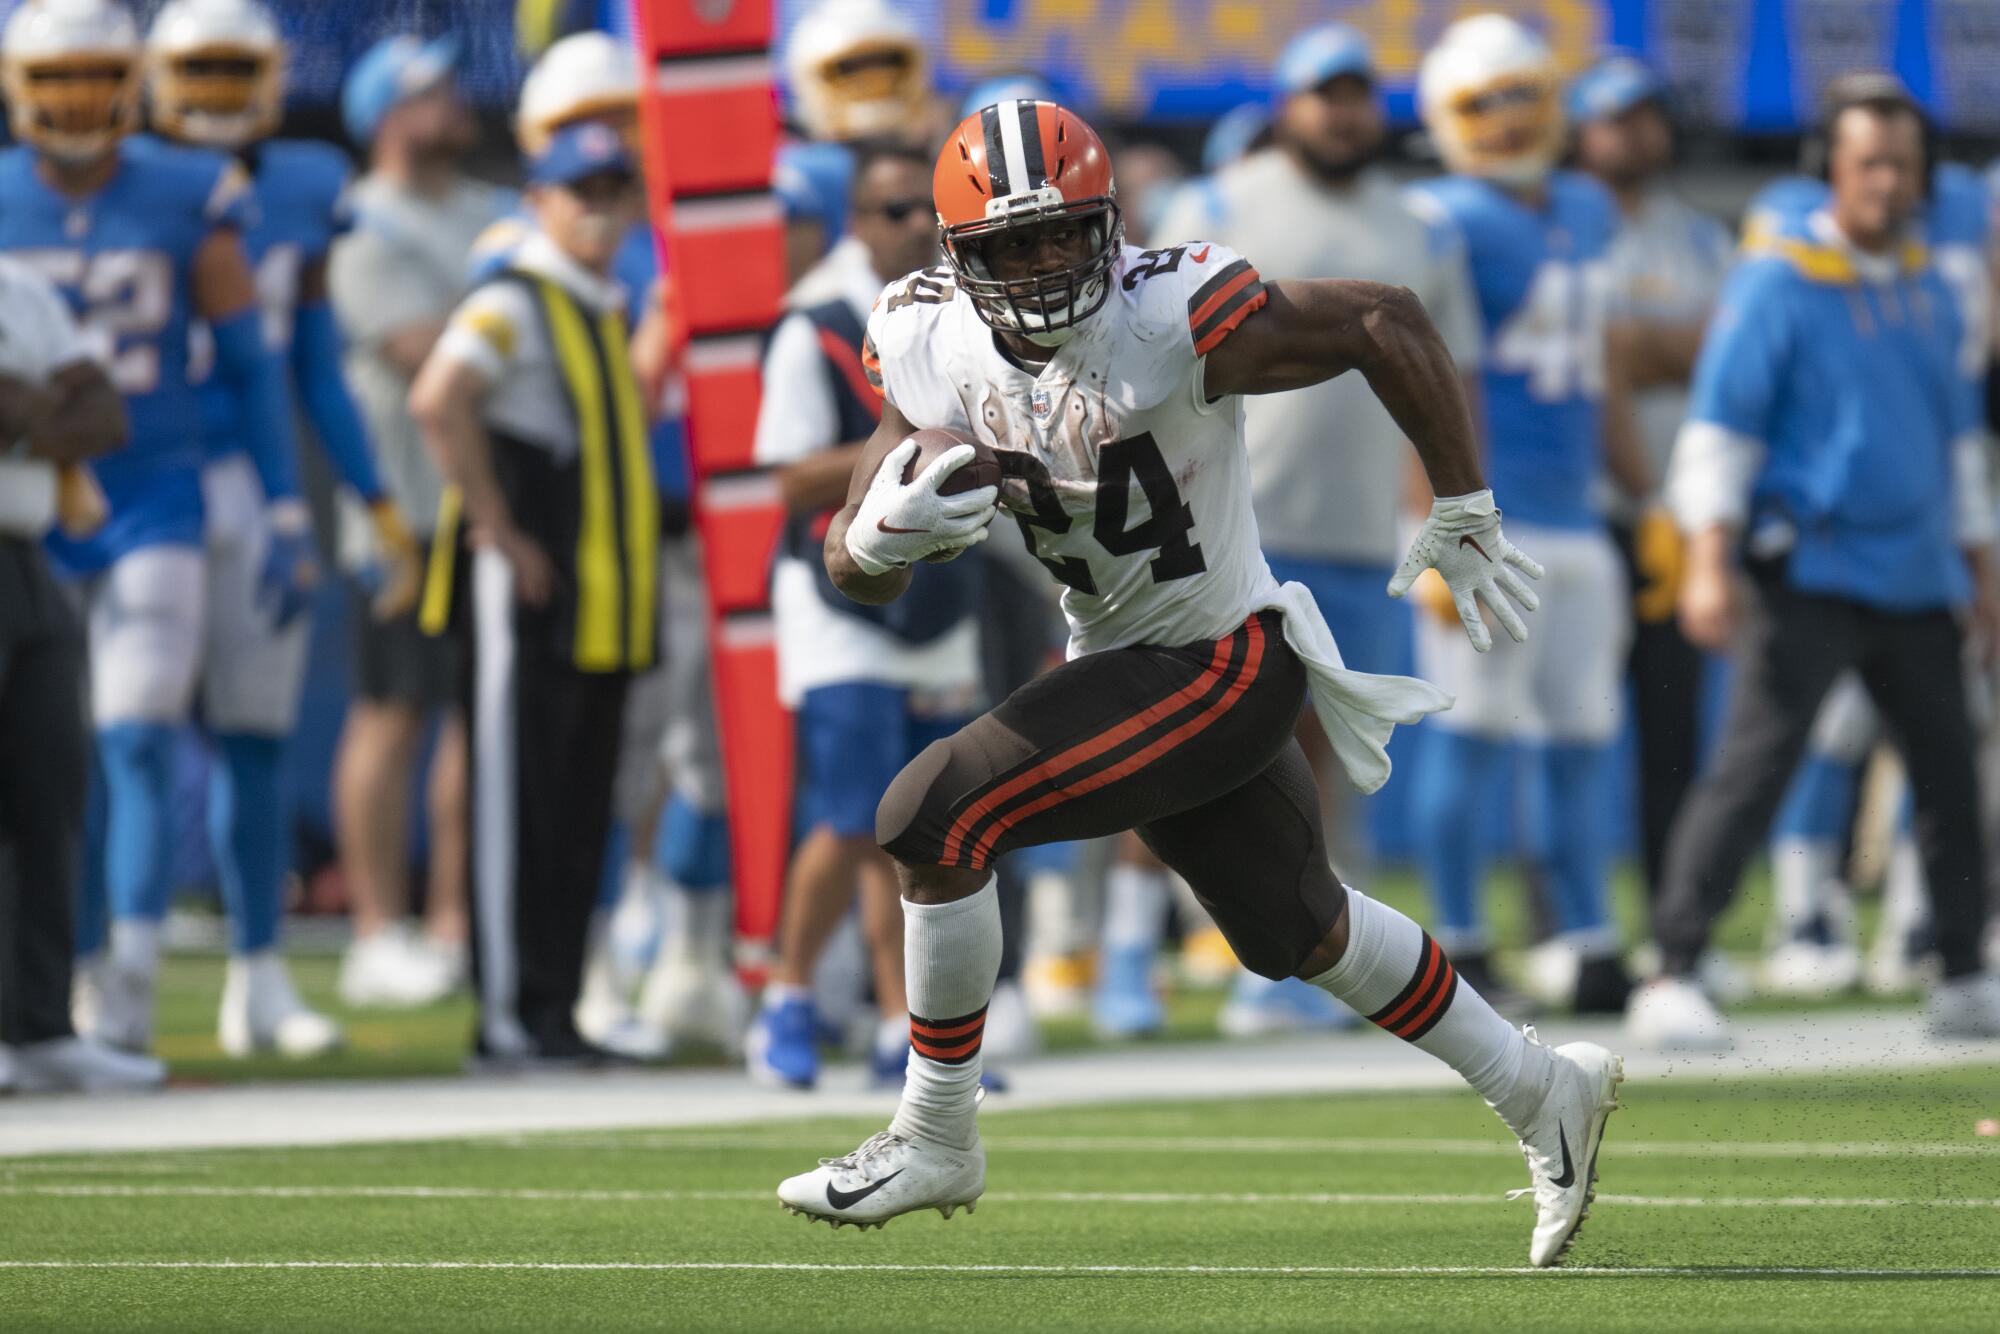 Cleveland Browns running back Nick Chubb runs with the ball against the Chargers.